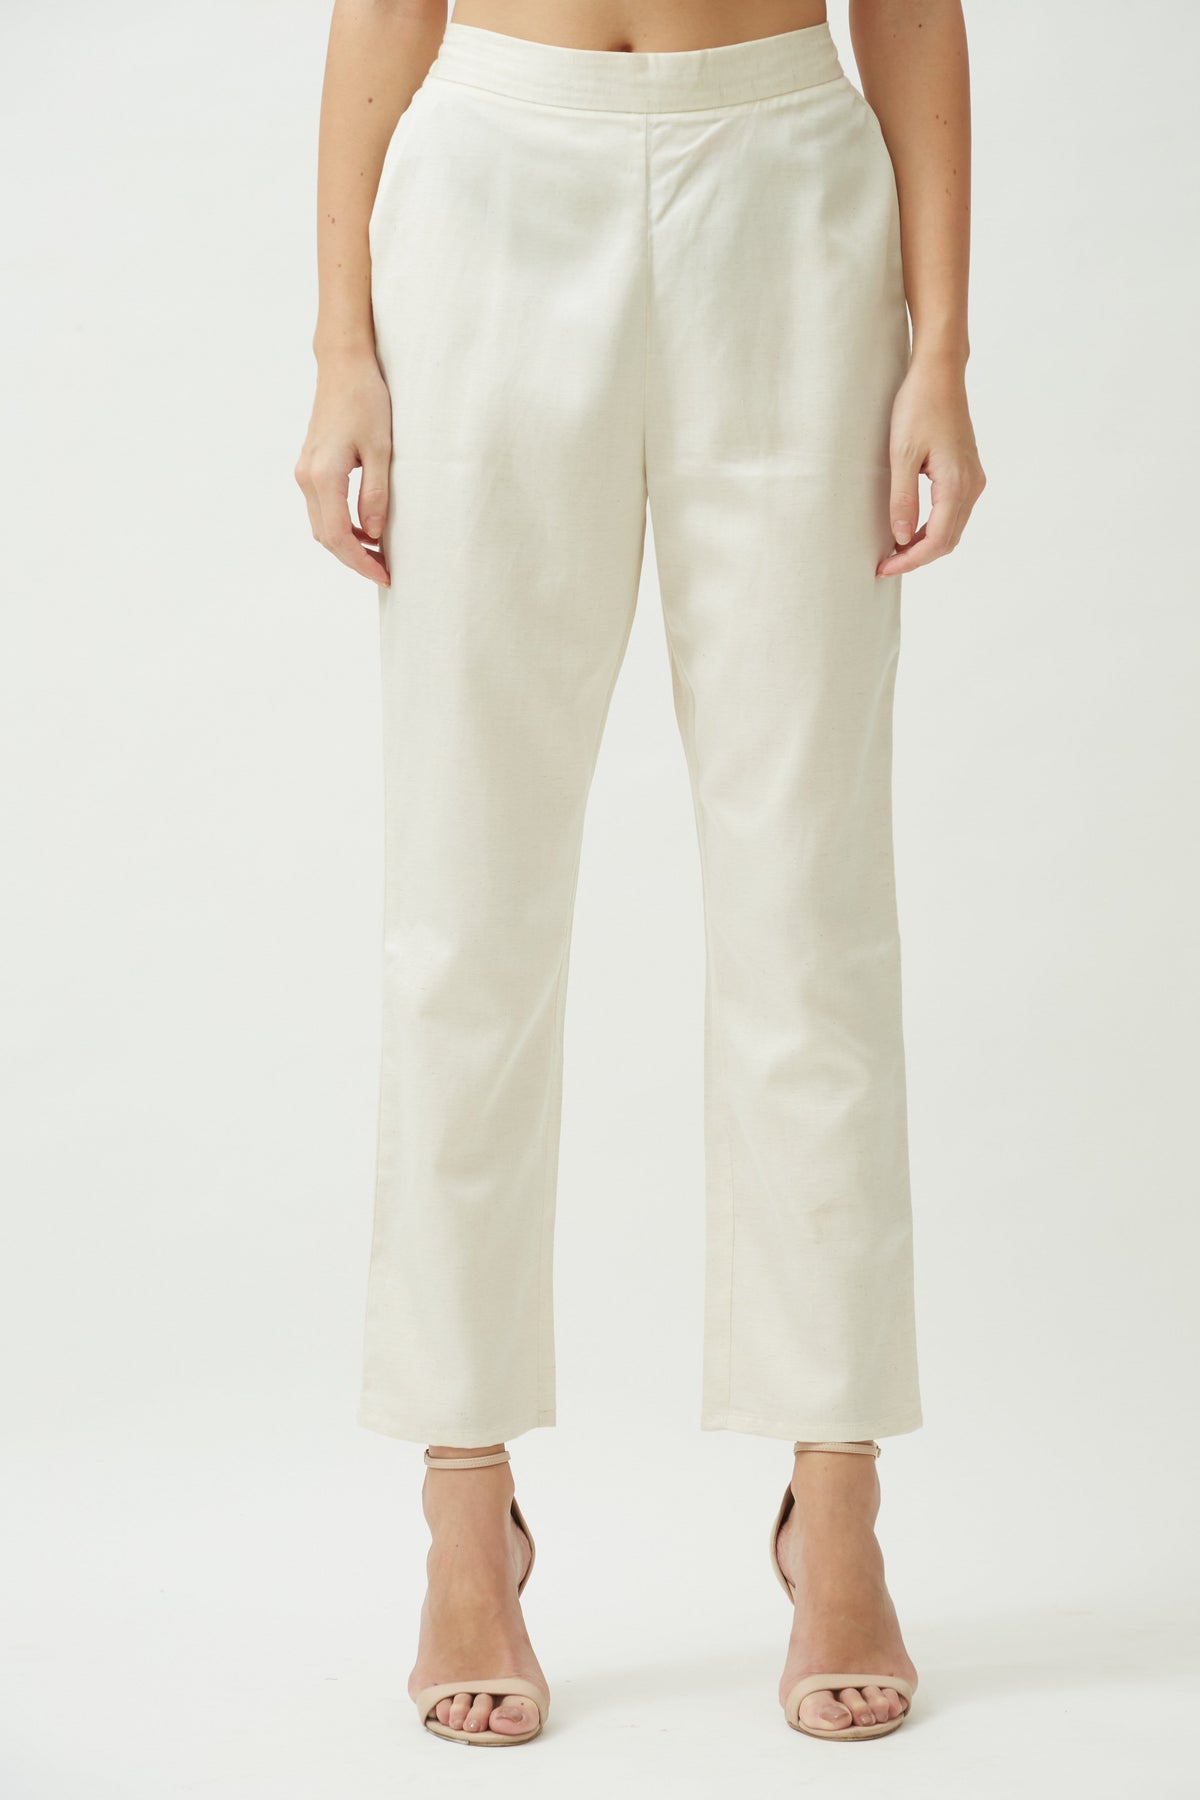 Saltpetre womens wear, indo-western pants for semi formal, casual, occassional wear. Comfortably pencil-shaped ankle-length leg pants in ecru cream white colour. Ankle length, back elastic and side pockets.